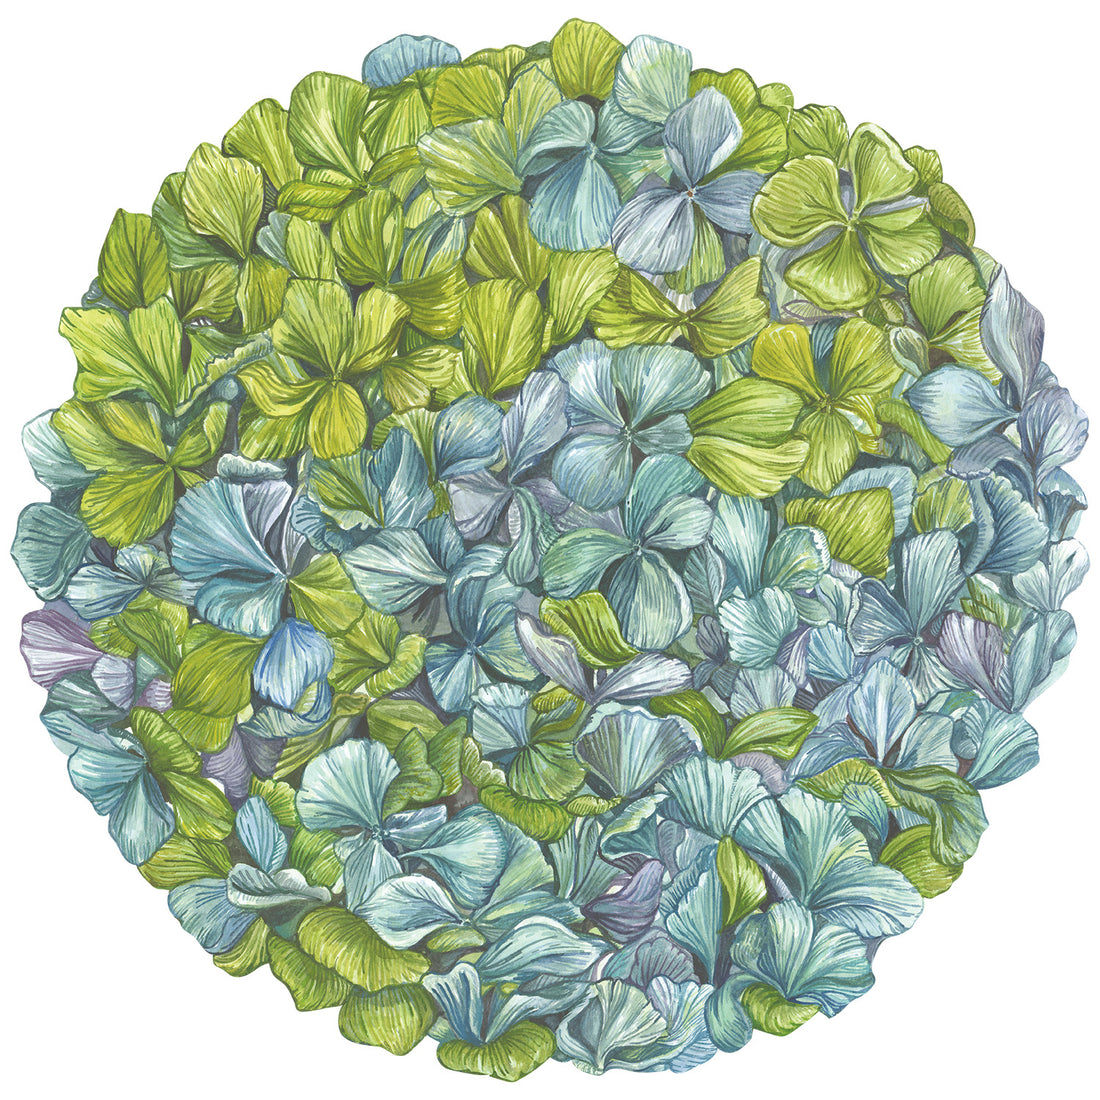 A round, die-cut illustration of densely-packed vibrant green and blue hydrangea blossoms.